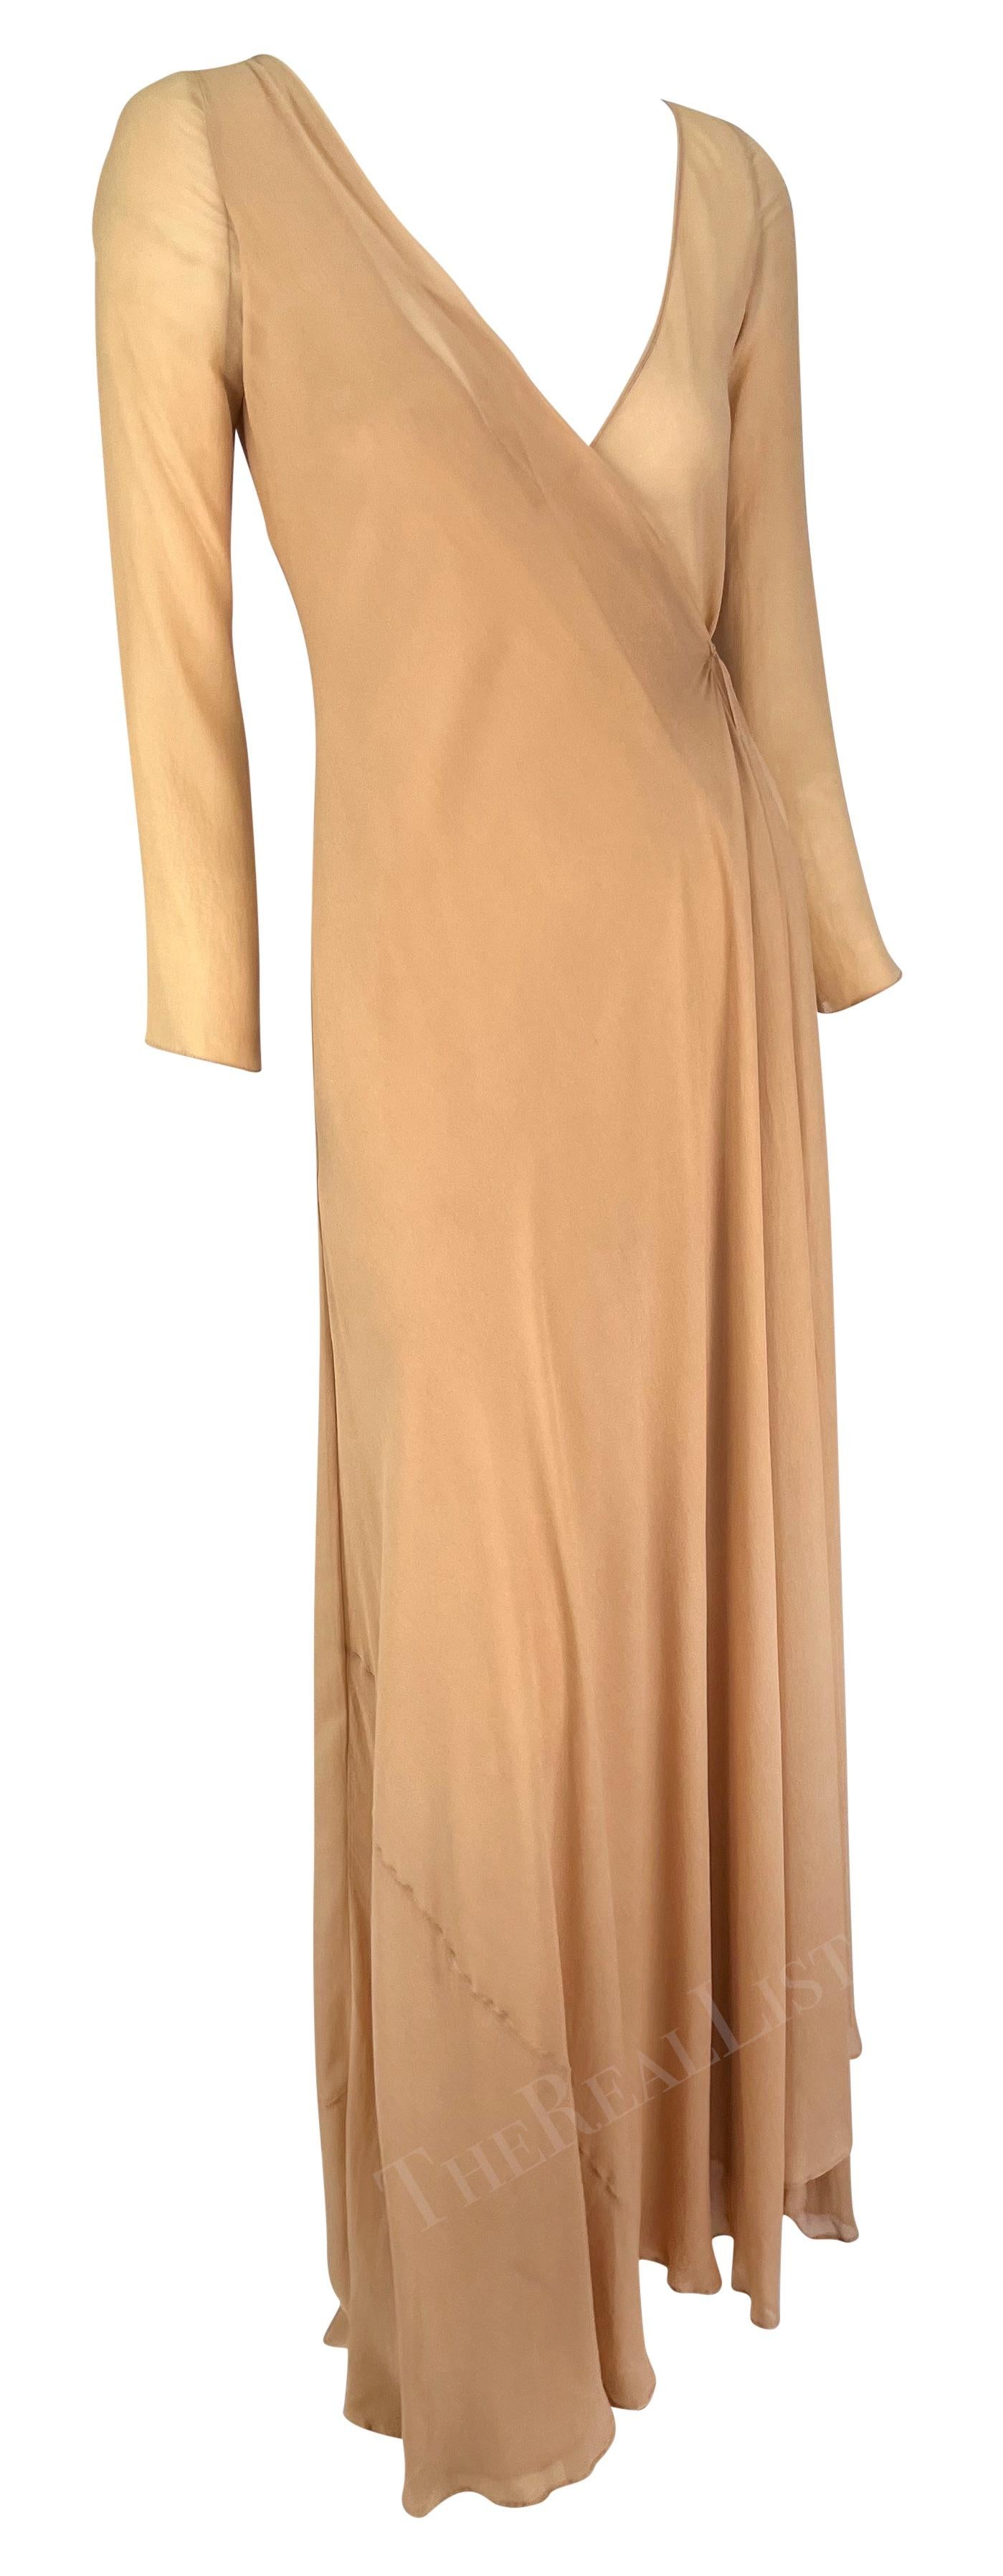 S/S 1998 Gucci by Tom Ford Beige Sheer Wrap Floor Length Sample Gown  For Sale 3